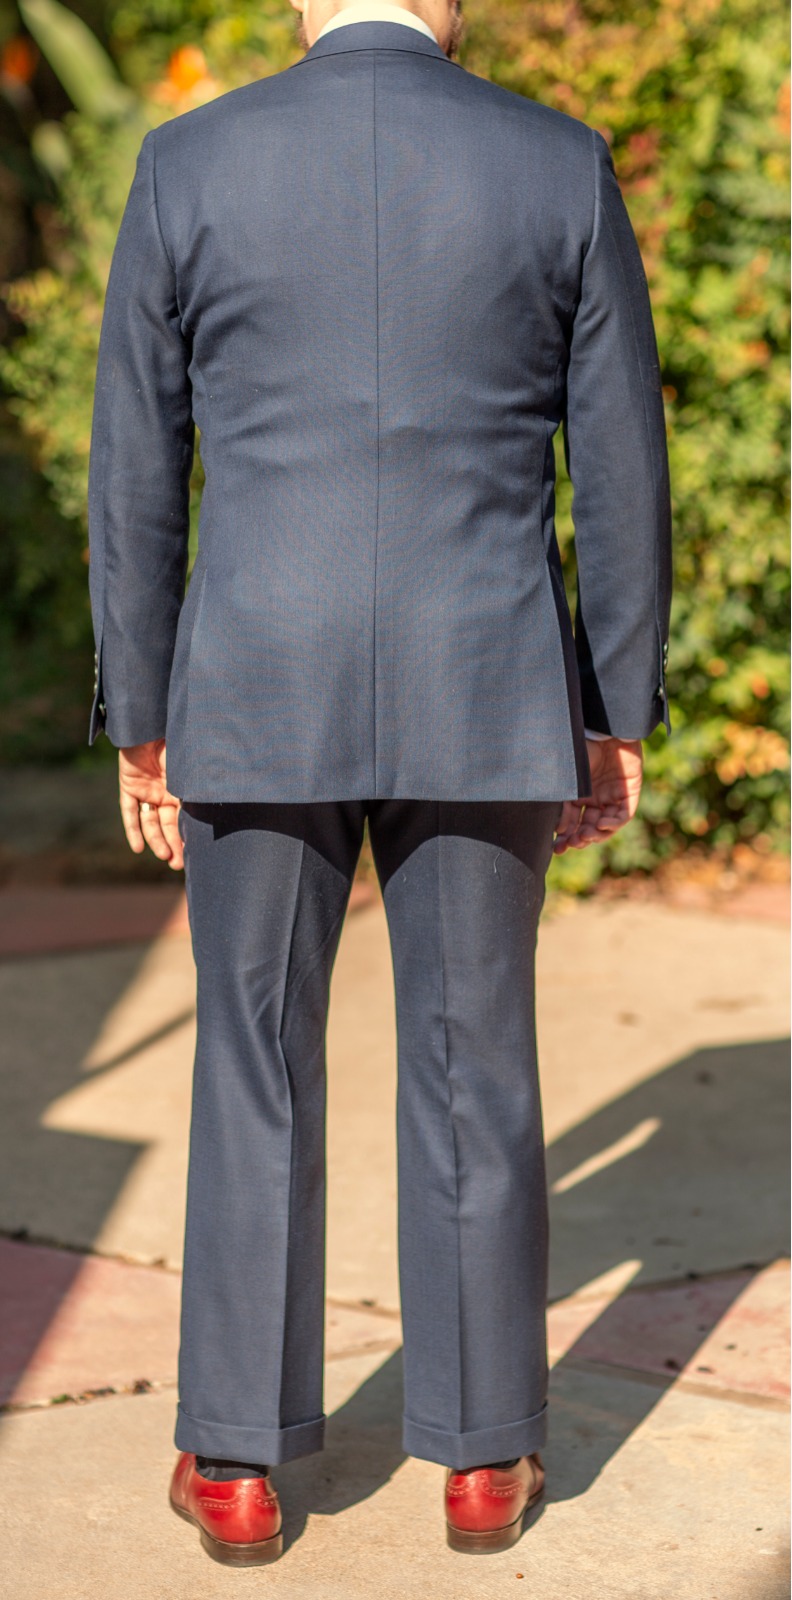 Enzo Custom Review: Rethinking the Limits of Made-to-Measure Suiting